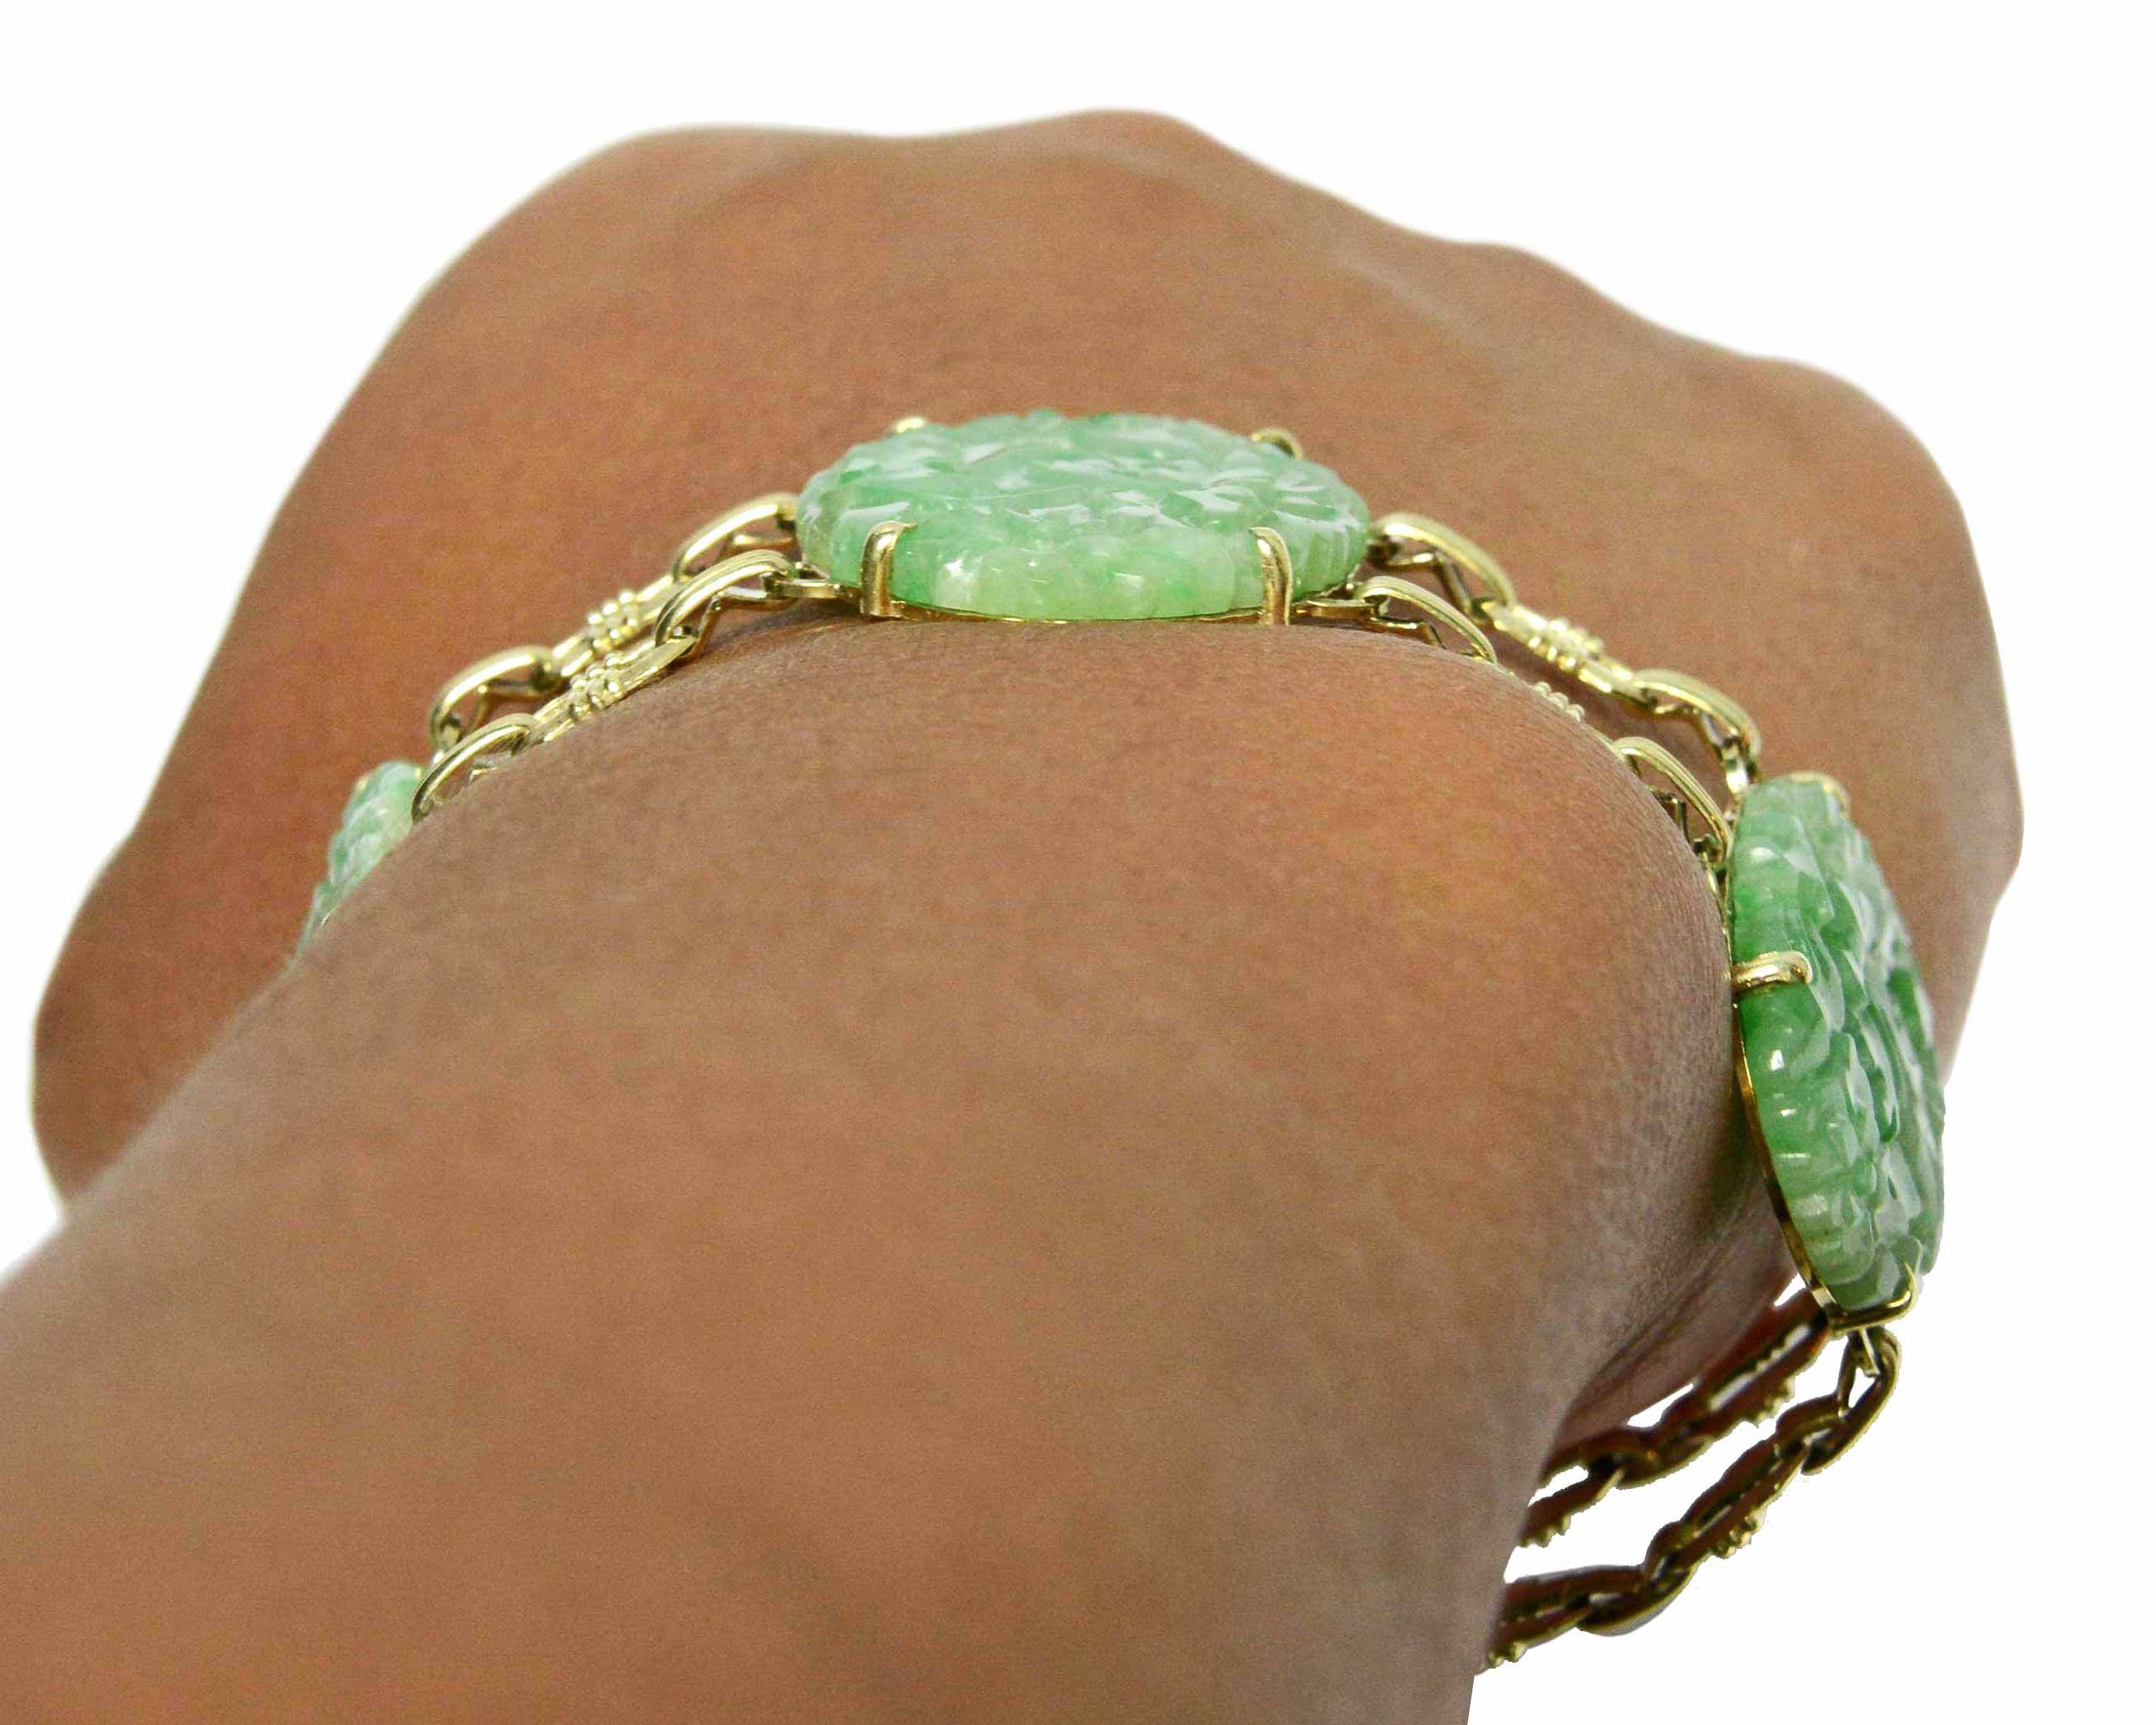 An antique, low profile oval jade and gold link bracelet.